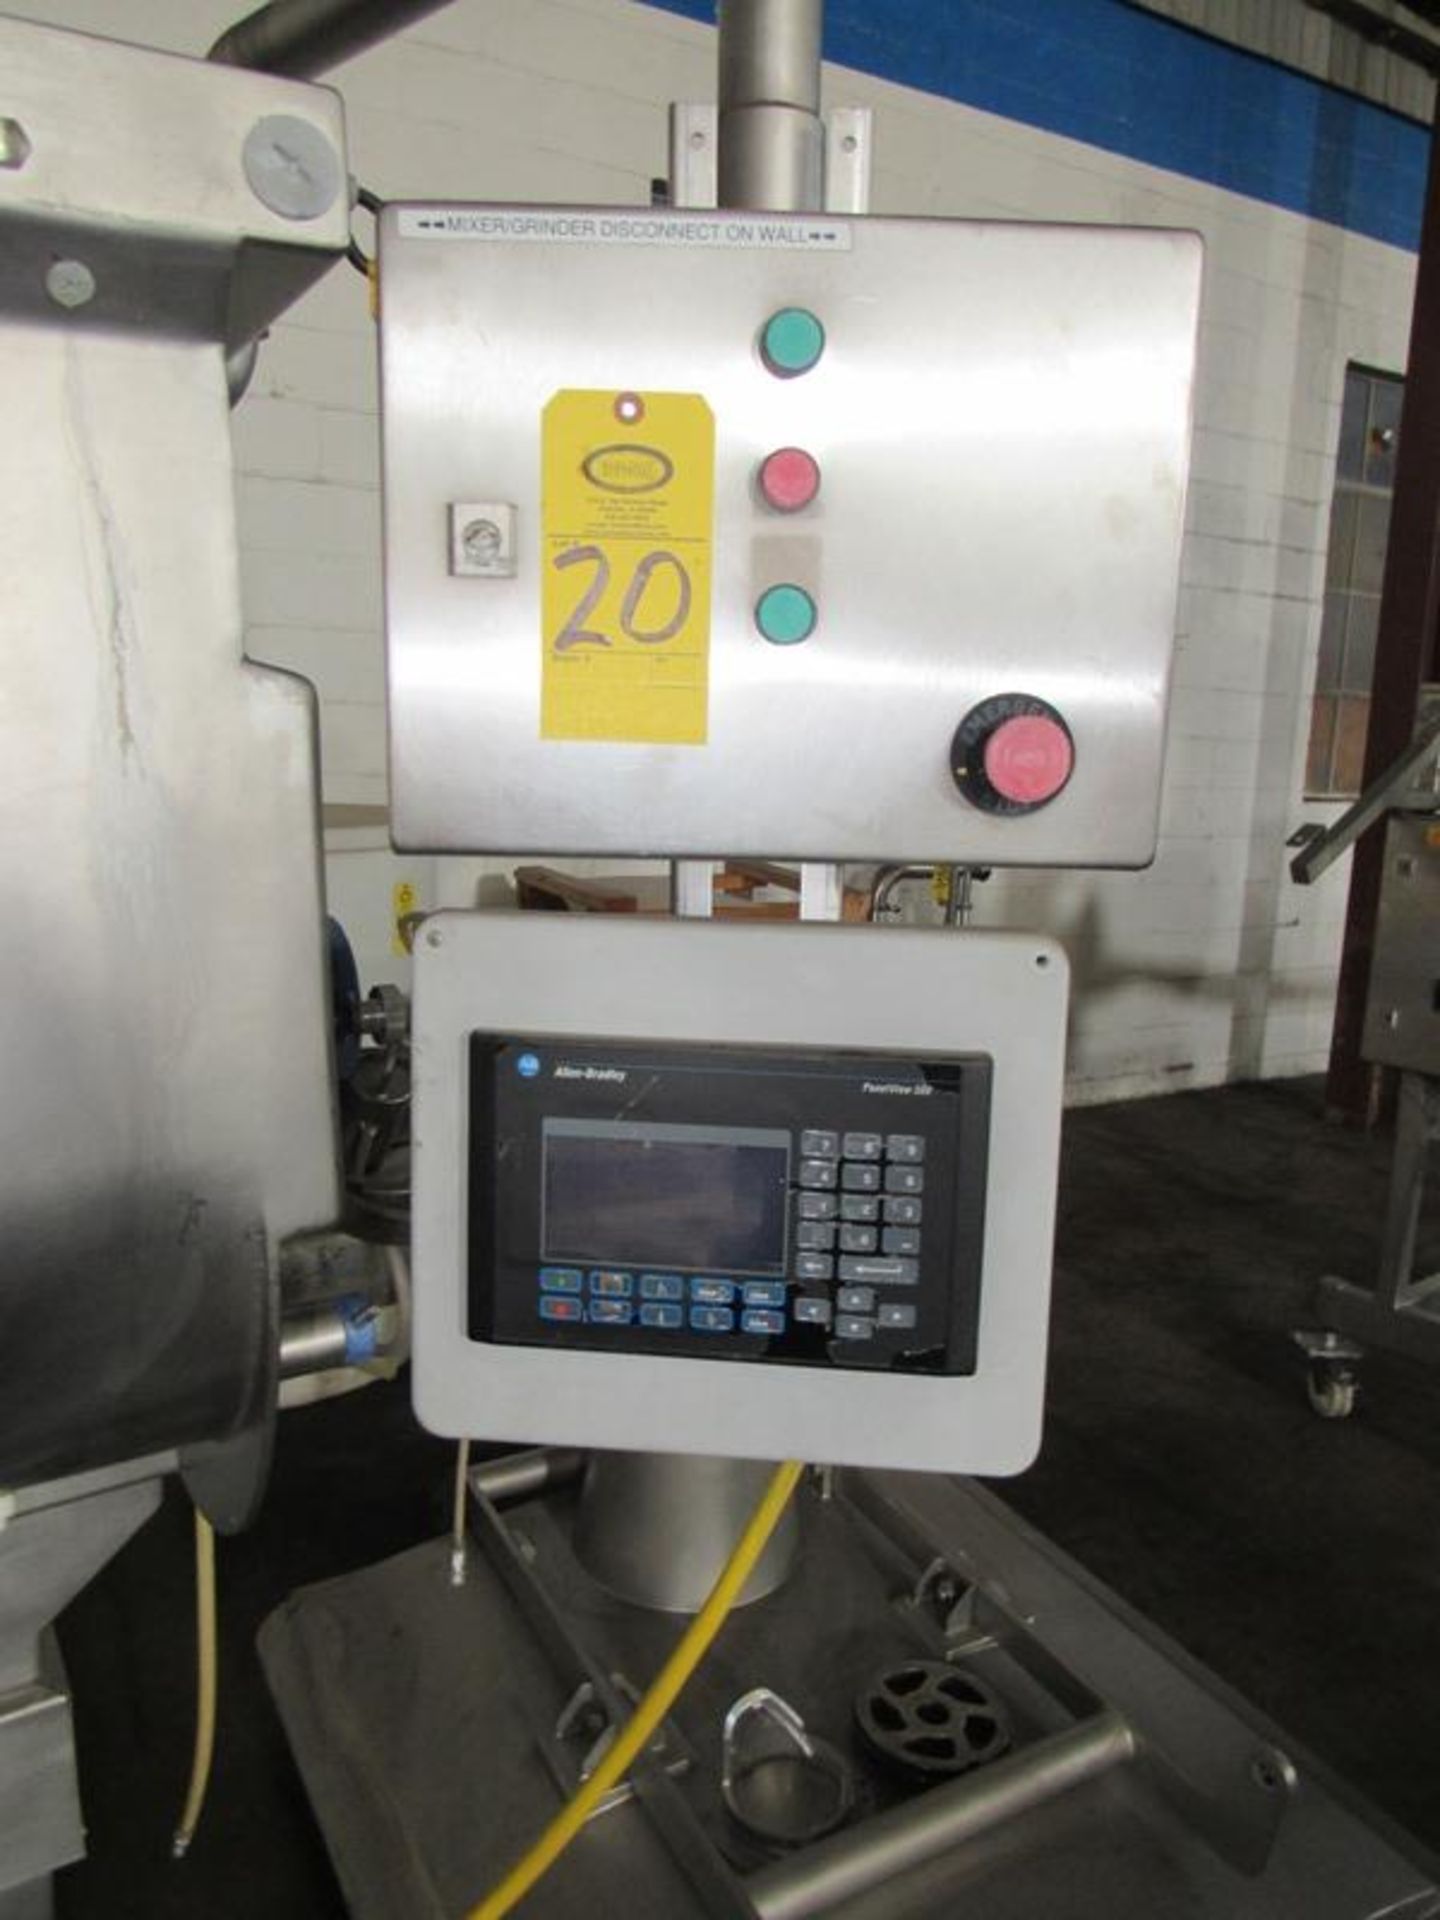 CFS Mdl. Combi Grind 1000 Stainless Steel Mixer/Grinder, dual agitation paddles, bottom injected CO2 - Image 12 of 12